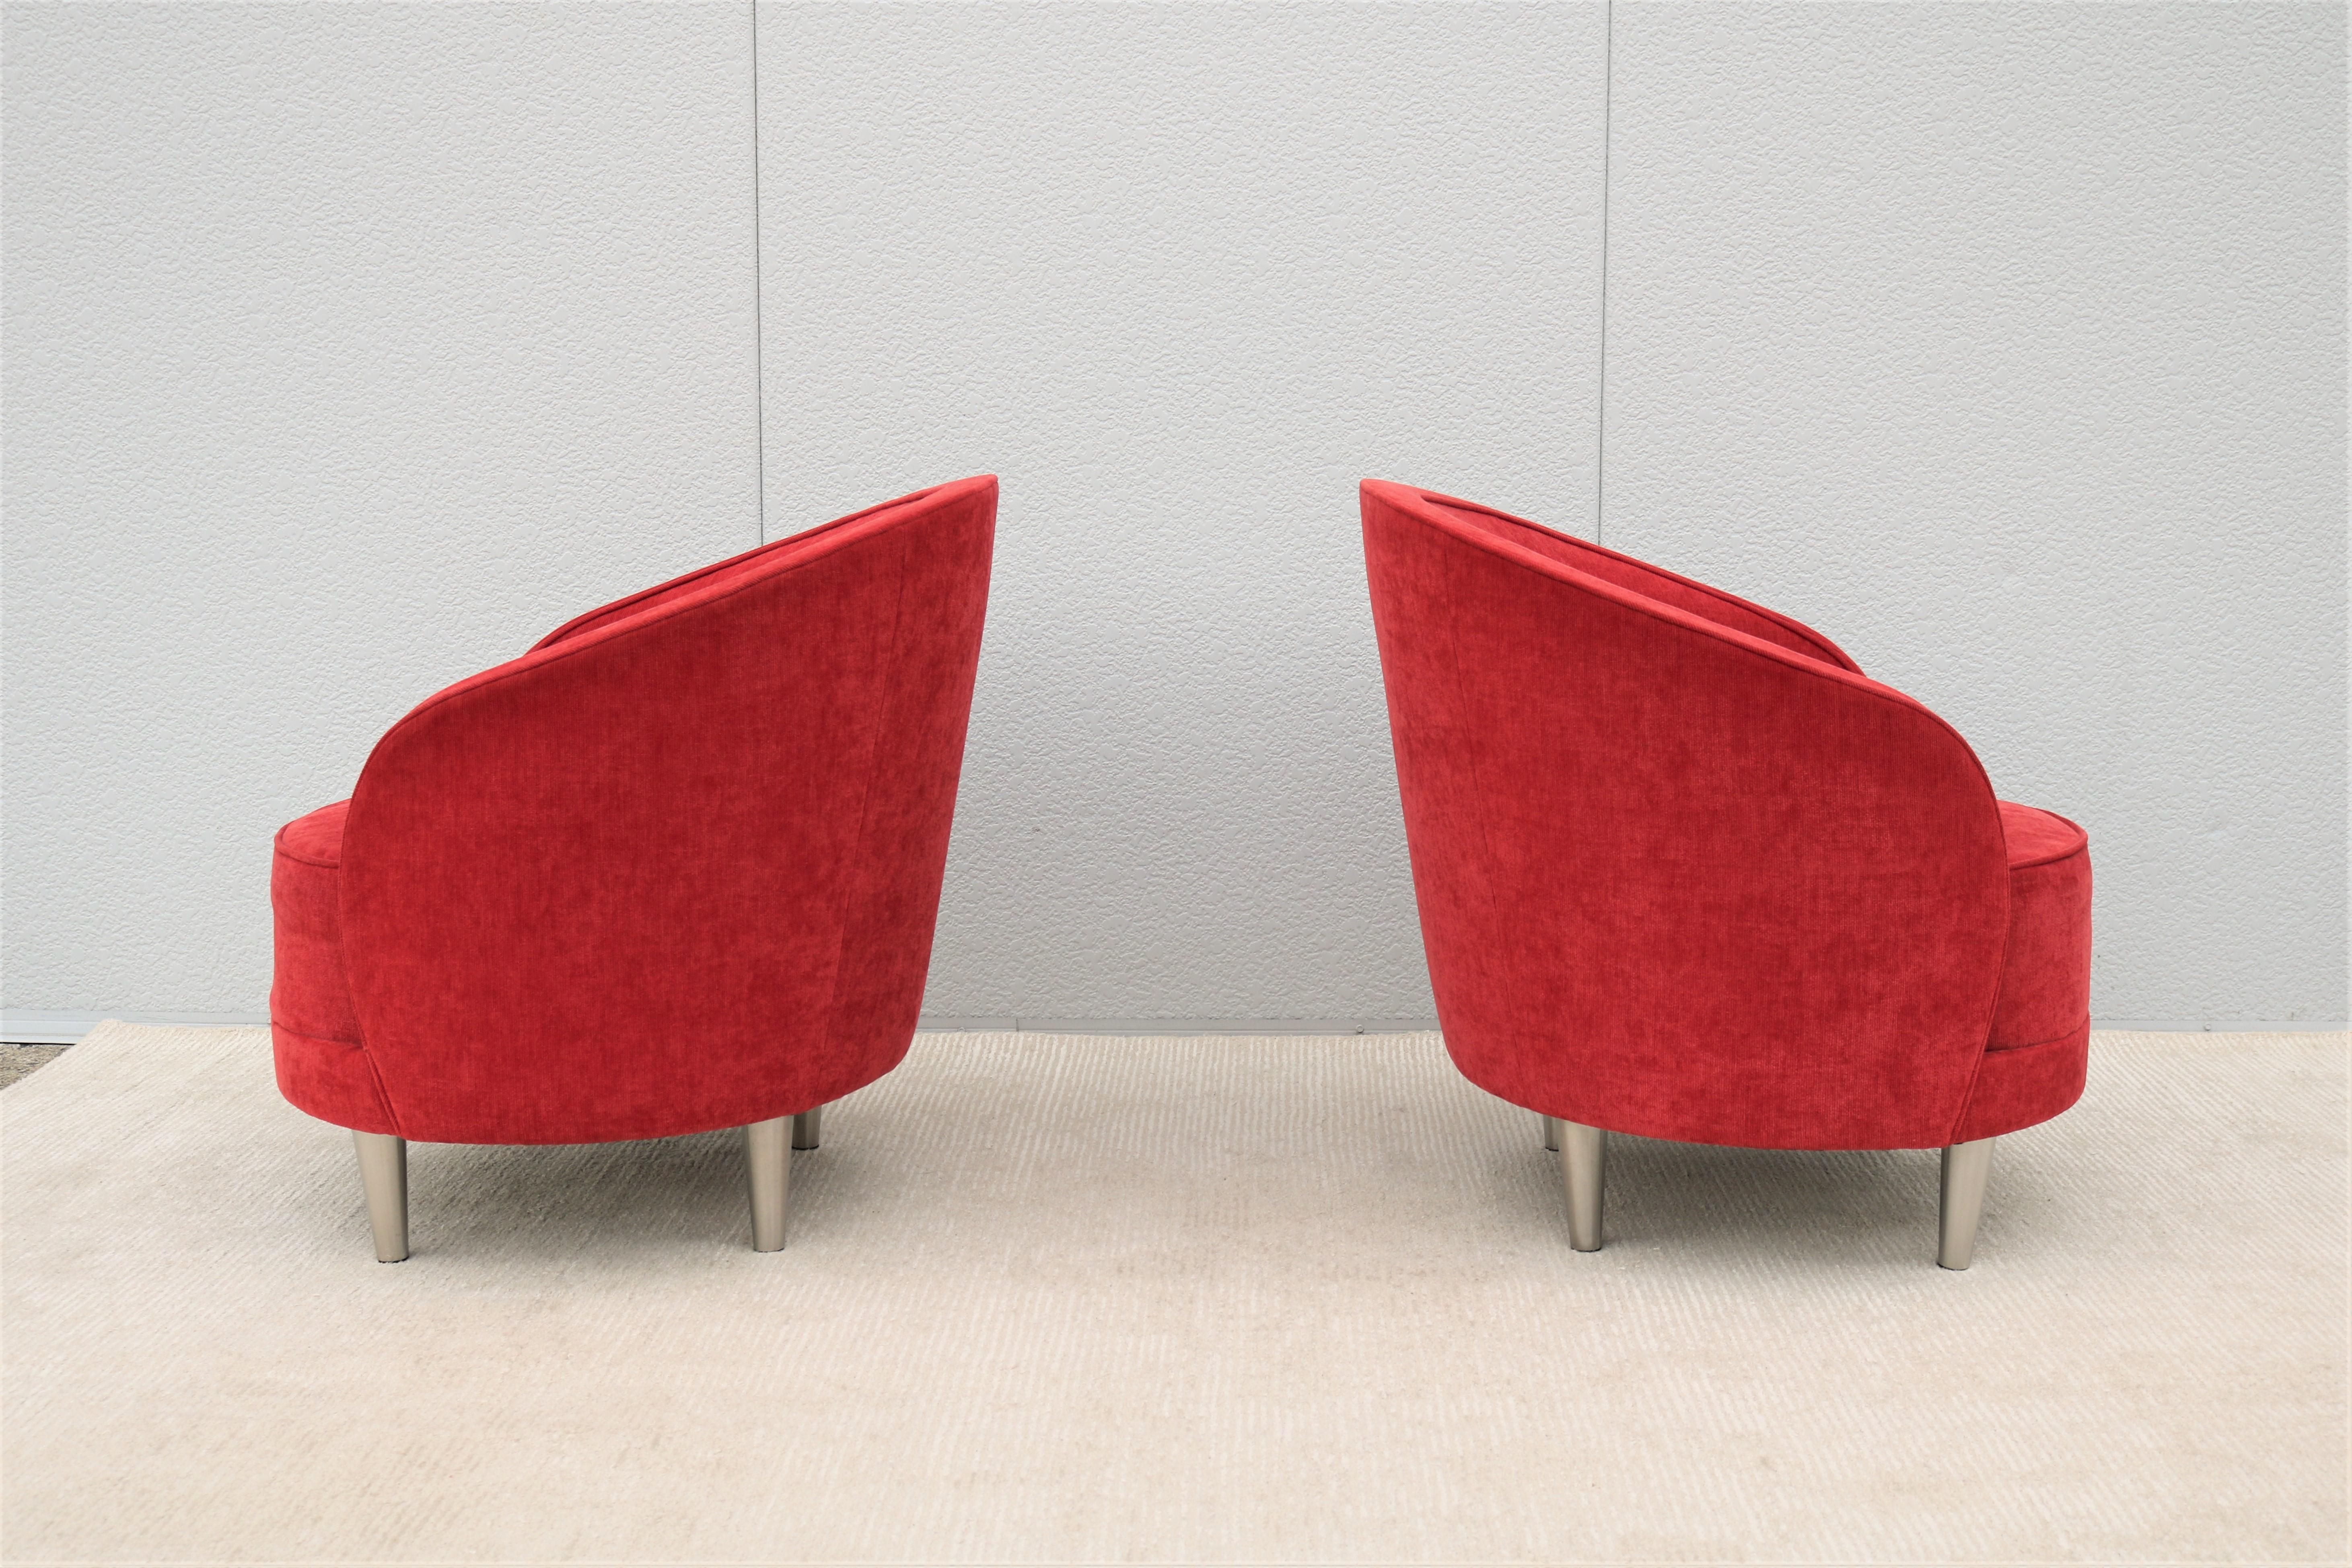 Fabric Contemporary Modern Martin Brattrud Kinsale Red Barrel Lounge Chairs, a Pair For Sale